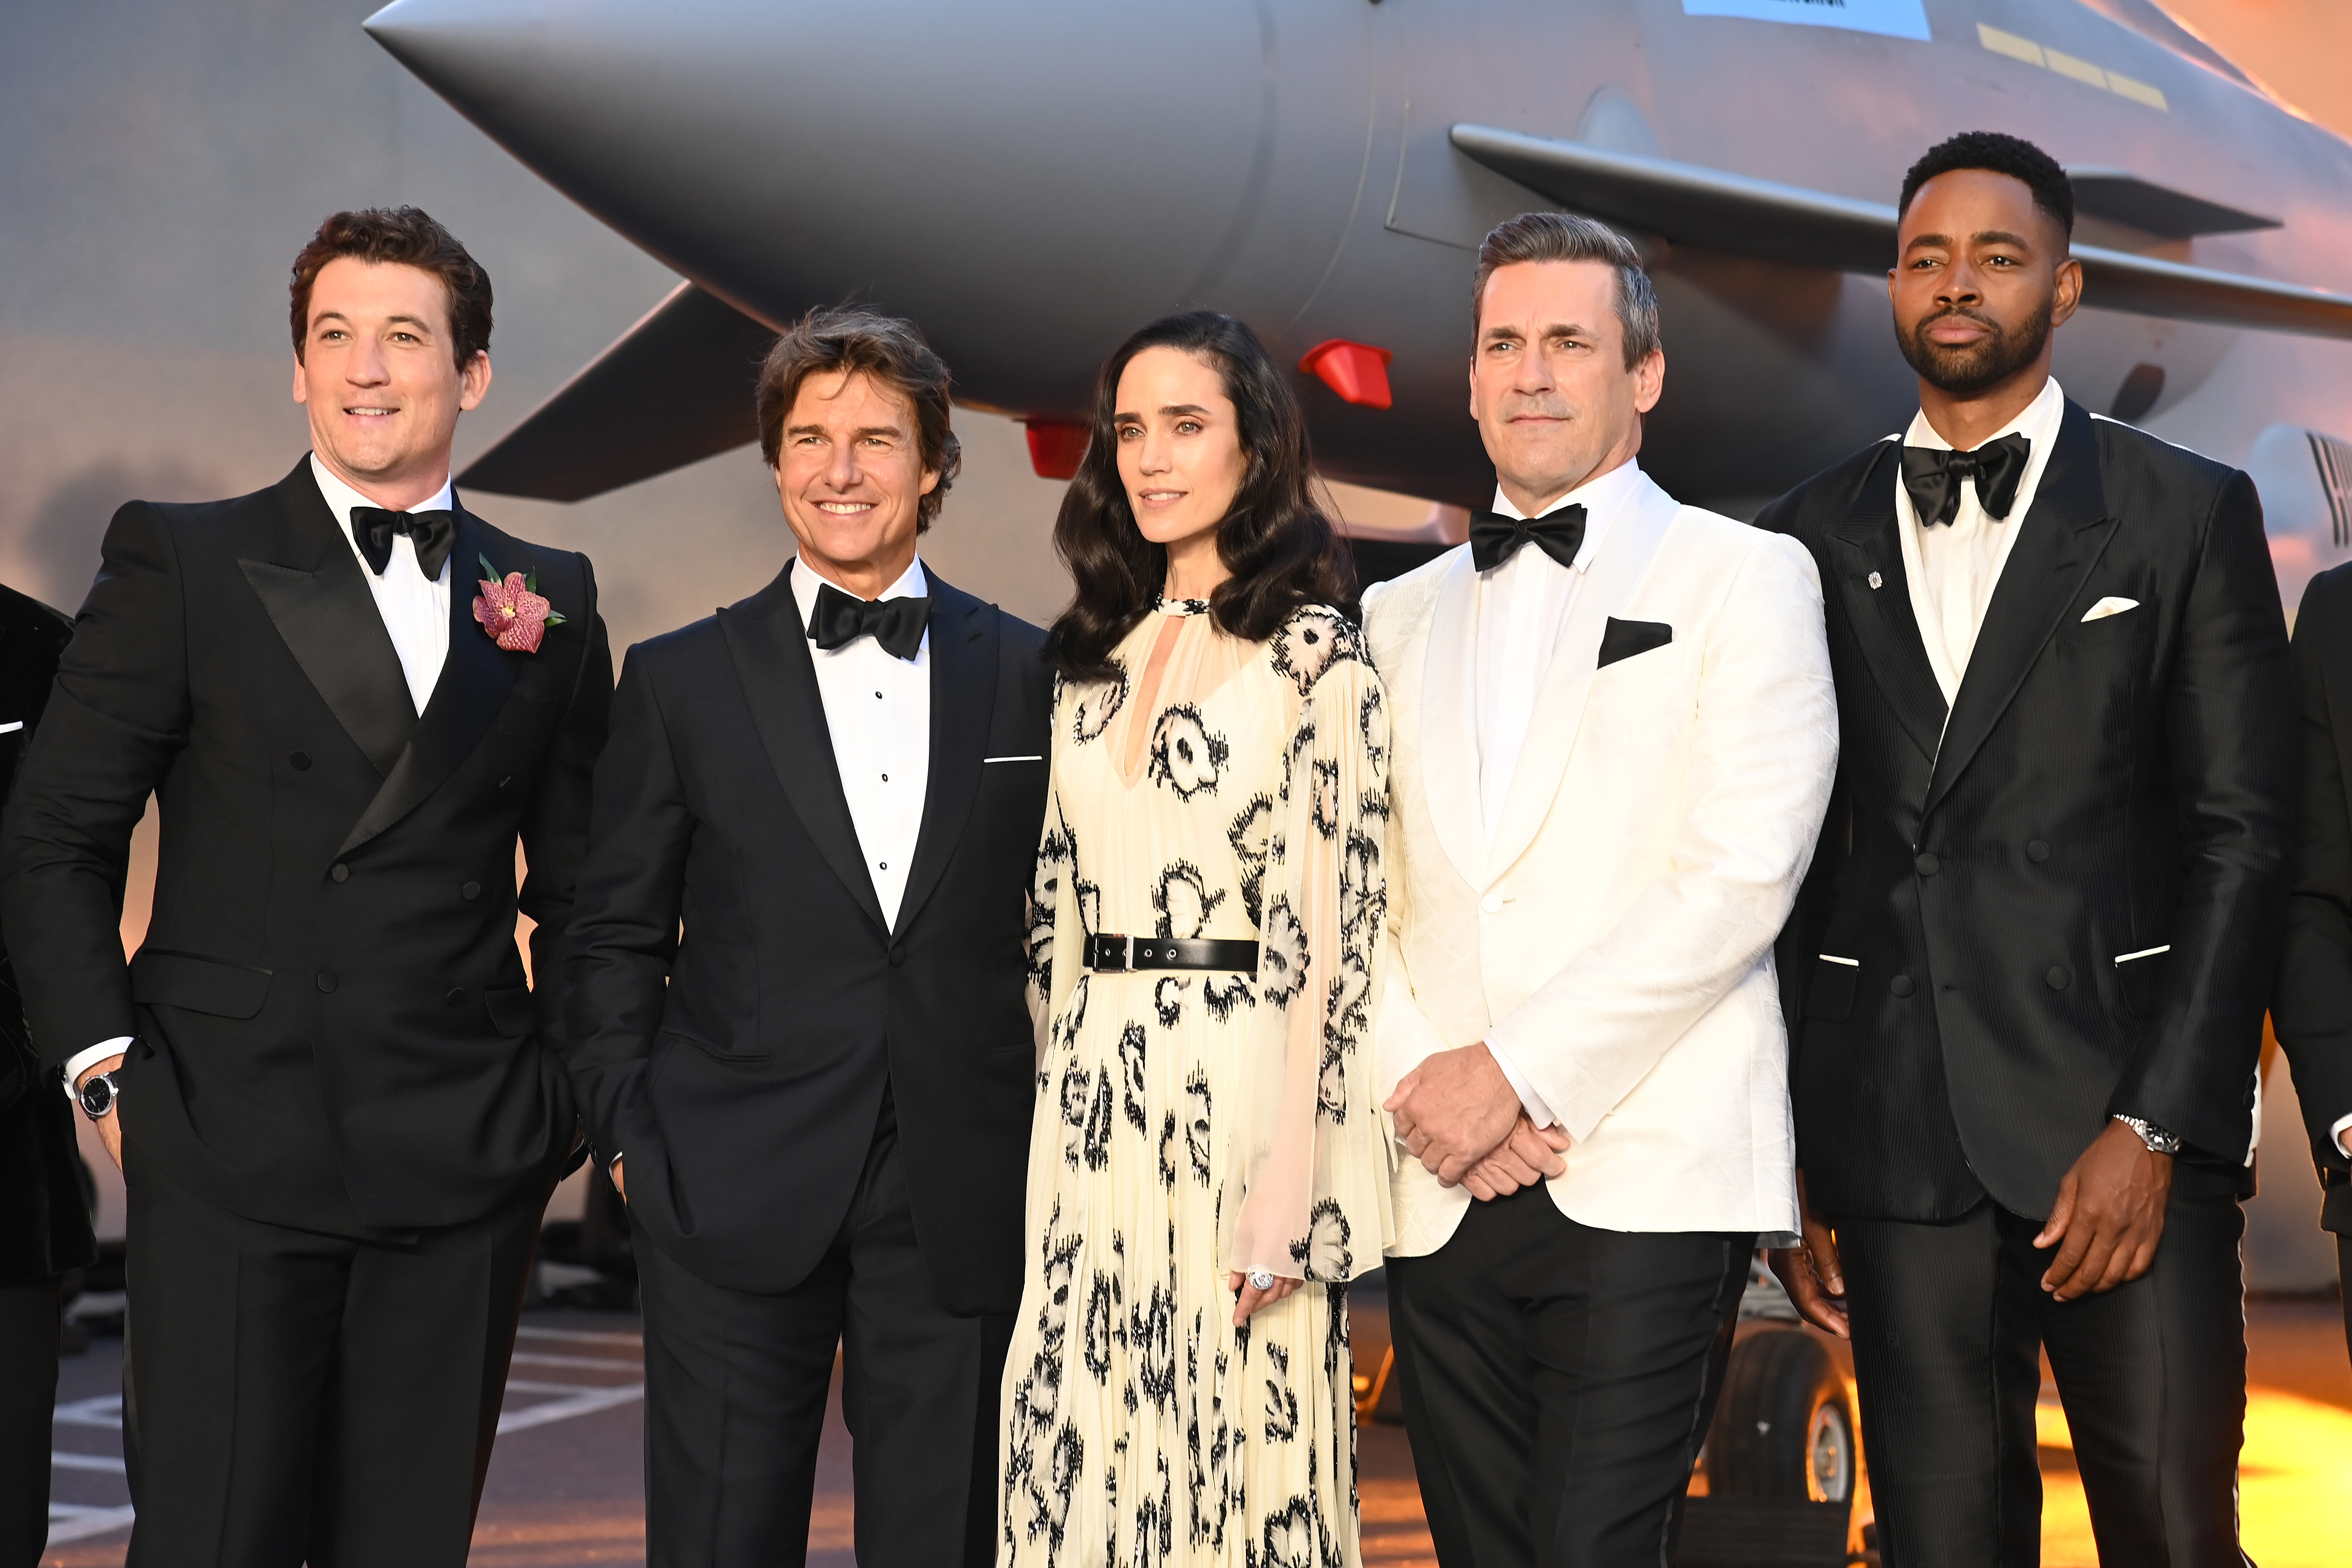 Miles Teller, Tom Cruise, Jennifer Connelly, Jon Hamm, and Jay Ellis at the "Top Gun: Maverick" Royal Film Performance on May 19, 2022, in London, England | Source: Getty Images